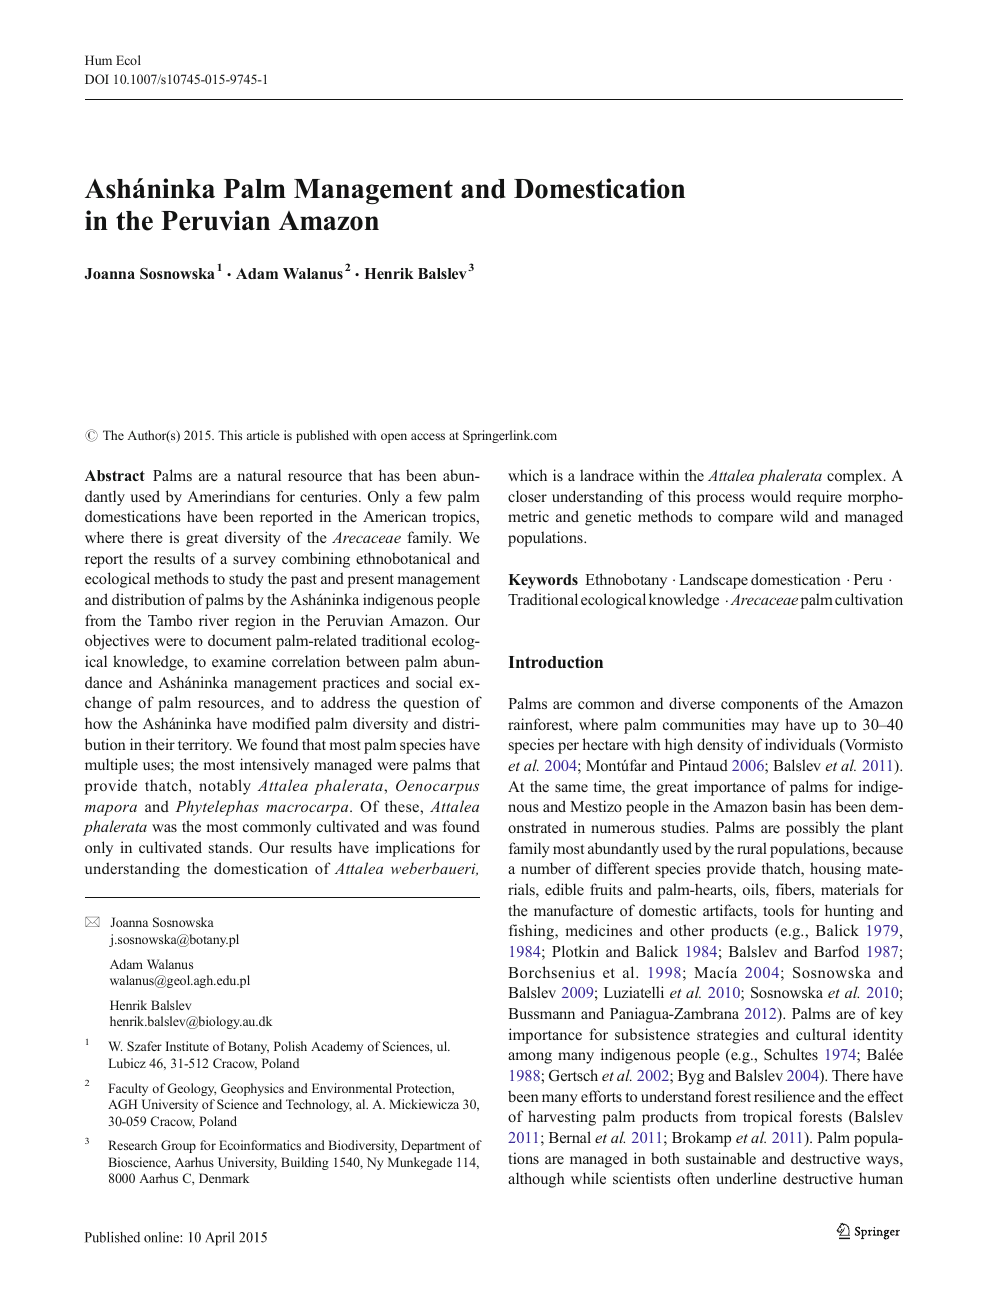 Ashaninka Palm Management And Domestication In The Peruvian Amazon Topic Of Research Paper In Biological Sciences Download Scholarly Article Pdf And Read For Free On Cyberleninka Open Science Hub